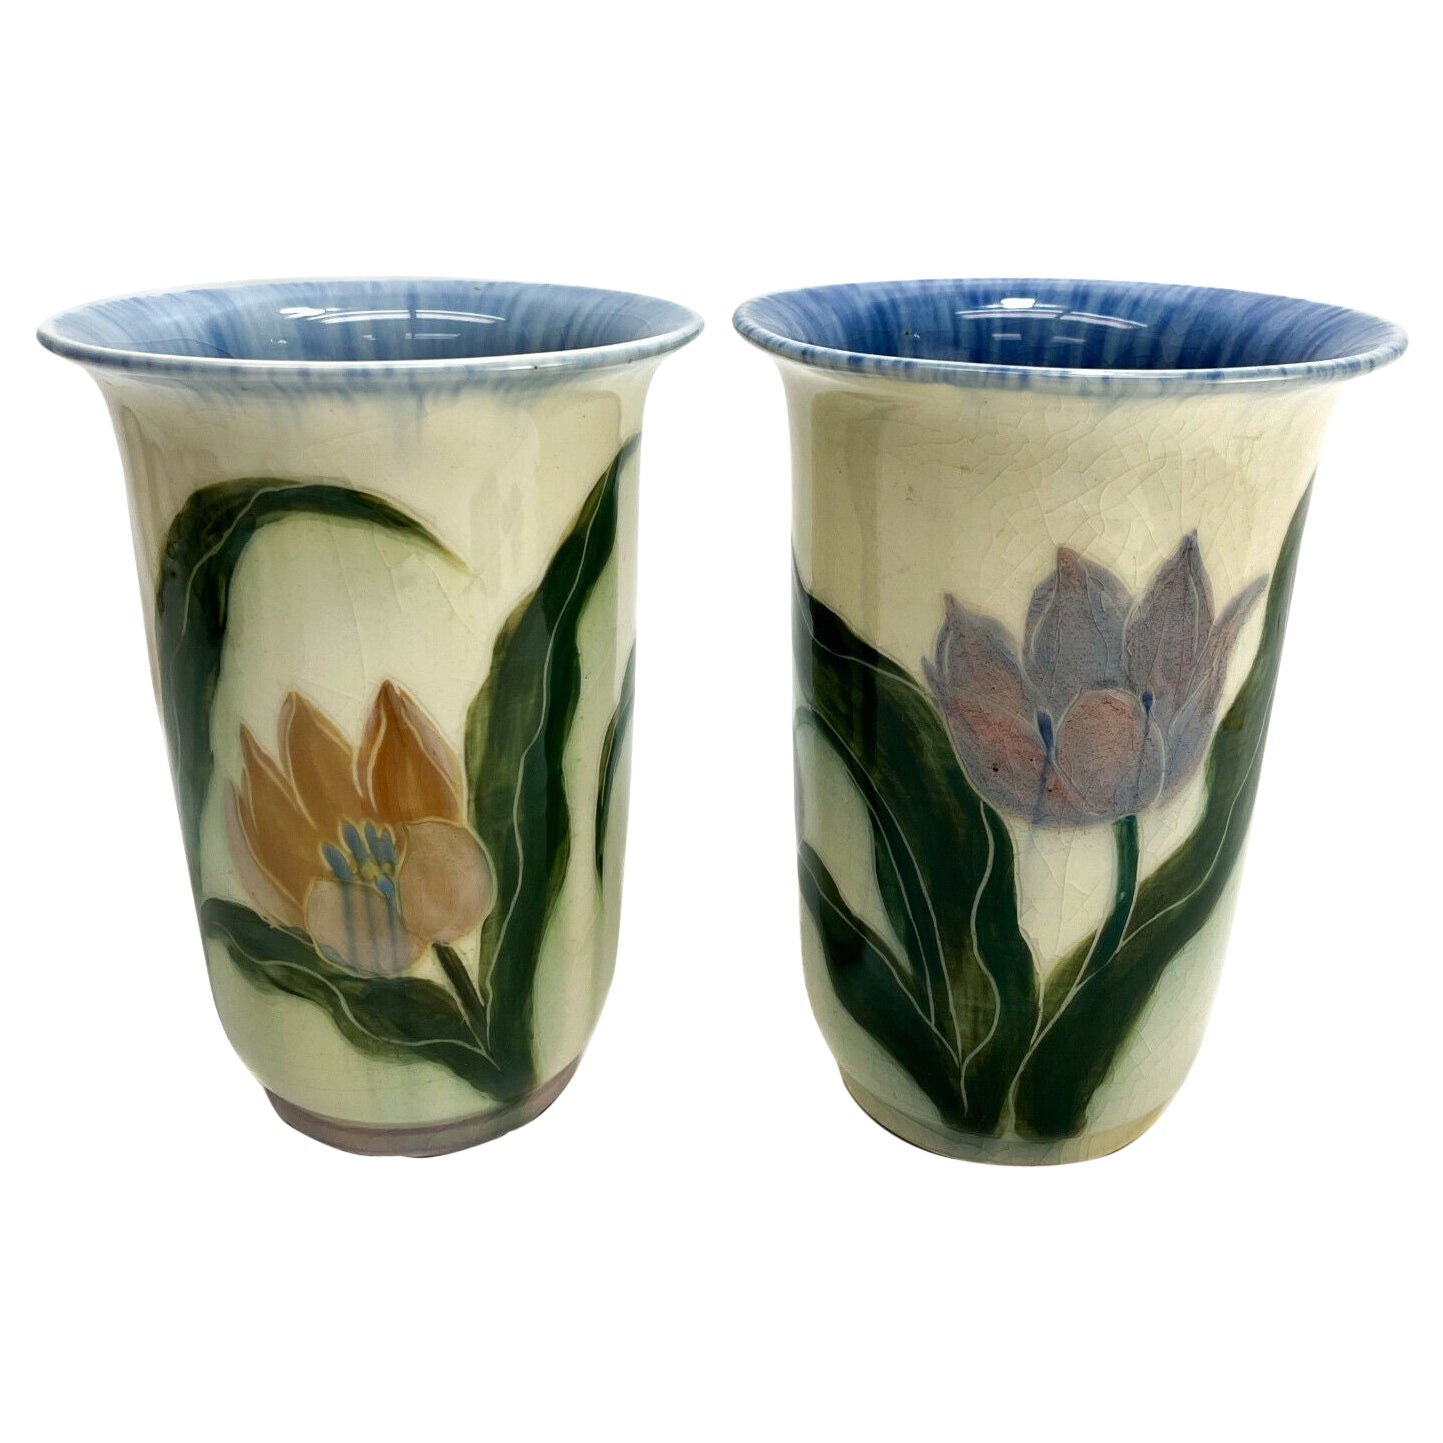 Pair of Rookwood Pottery Vases by E.T. Hurley #6806, Hand Painted Tulips, 1943